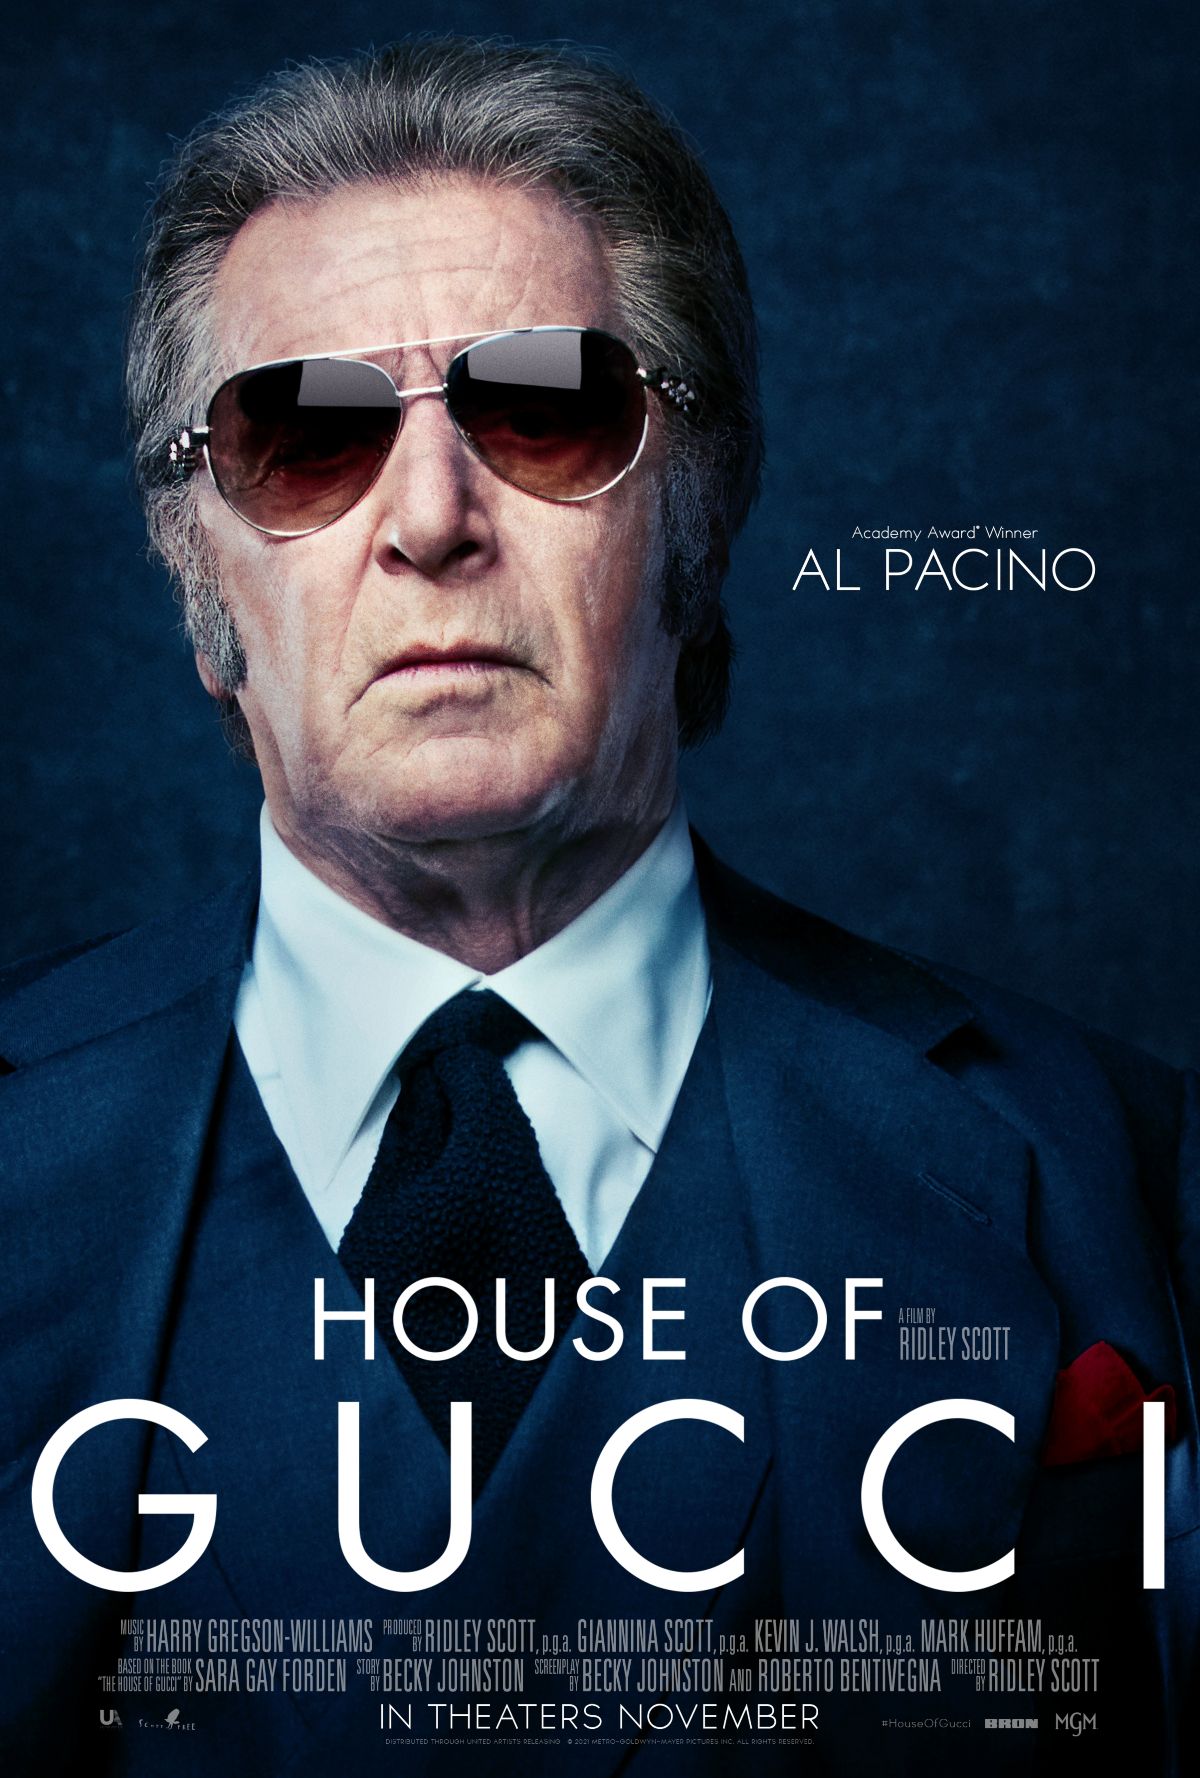 house-of-gucci-character-poster-al-pacino